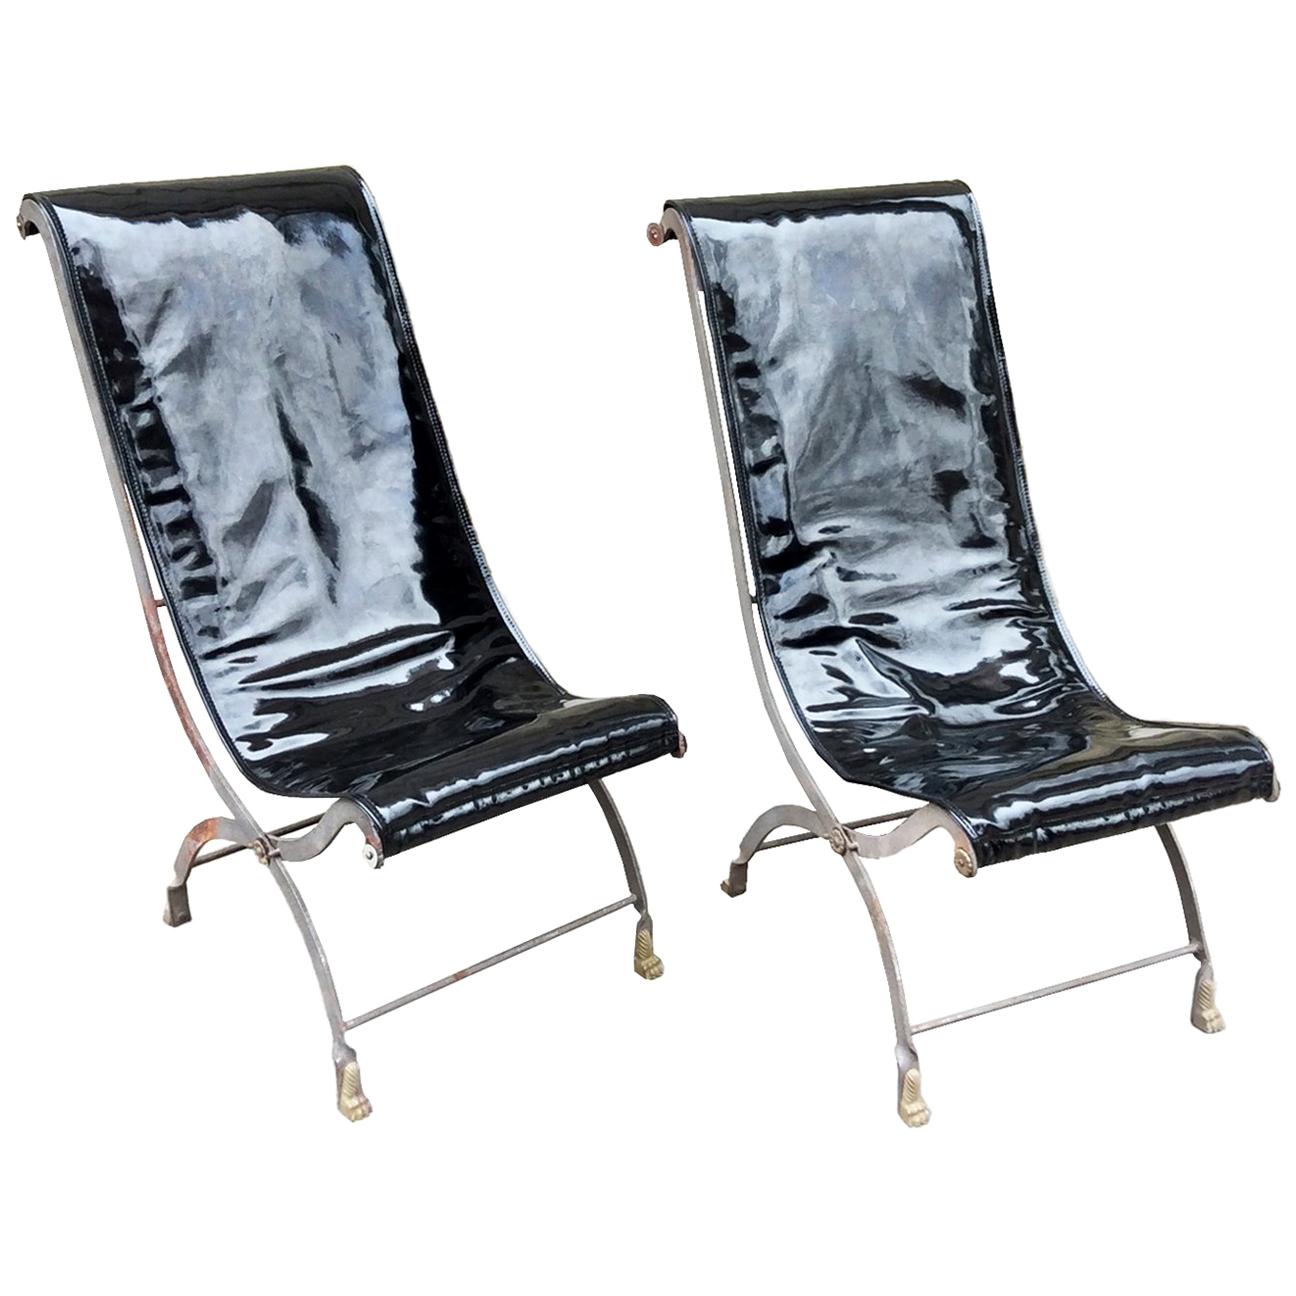 Pair of Early 20th Century Campaign Lounge Chairs in the Manner of Maison Jansen